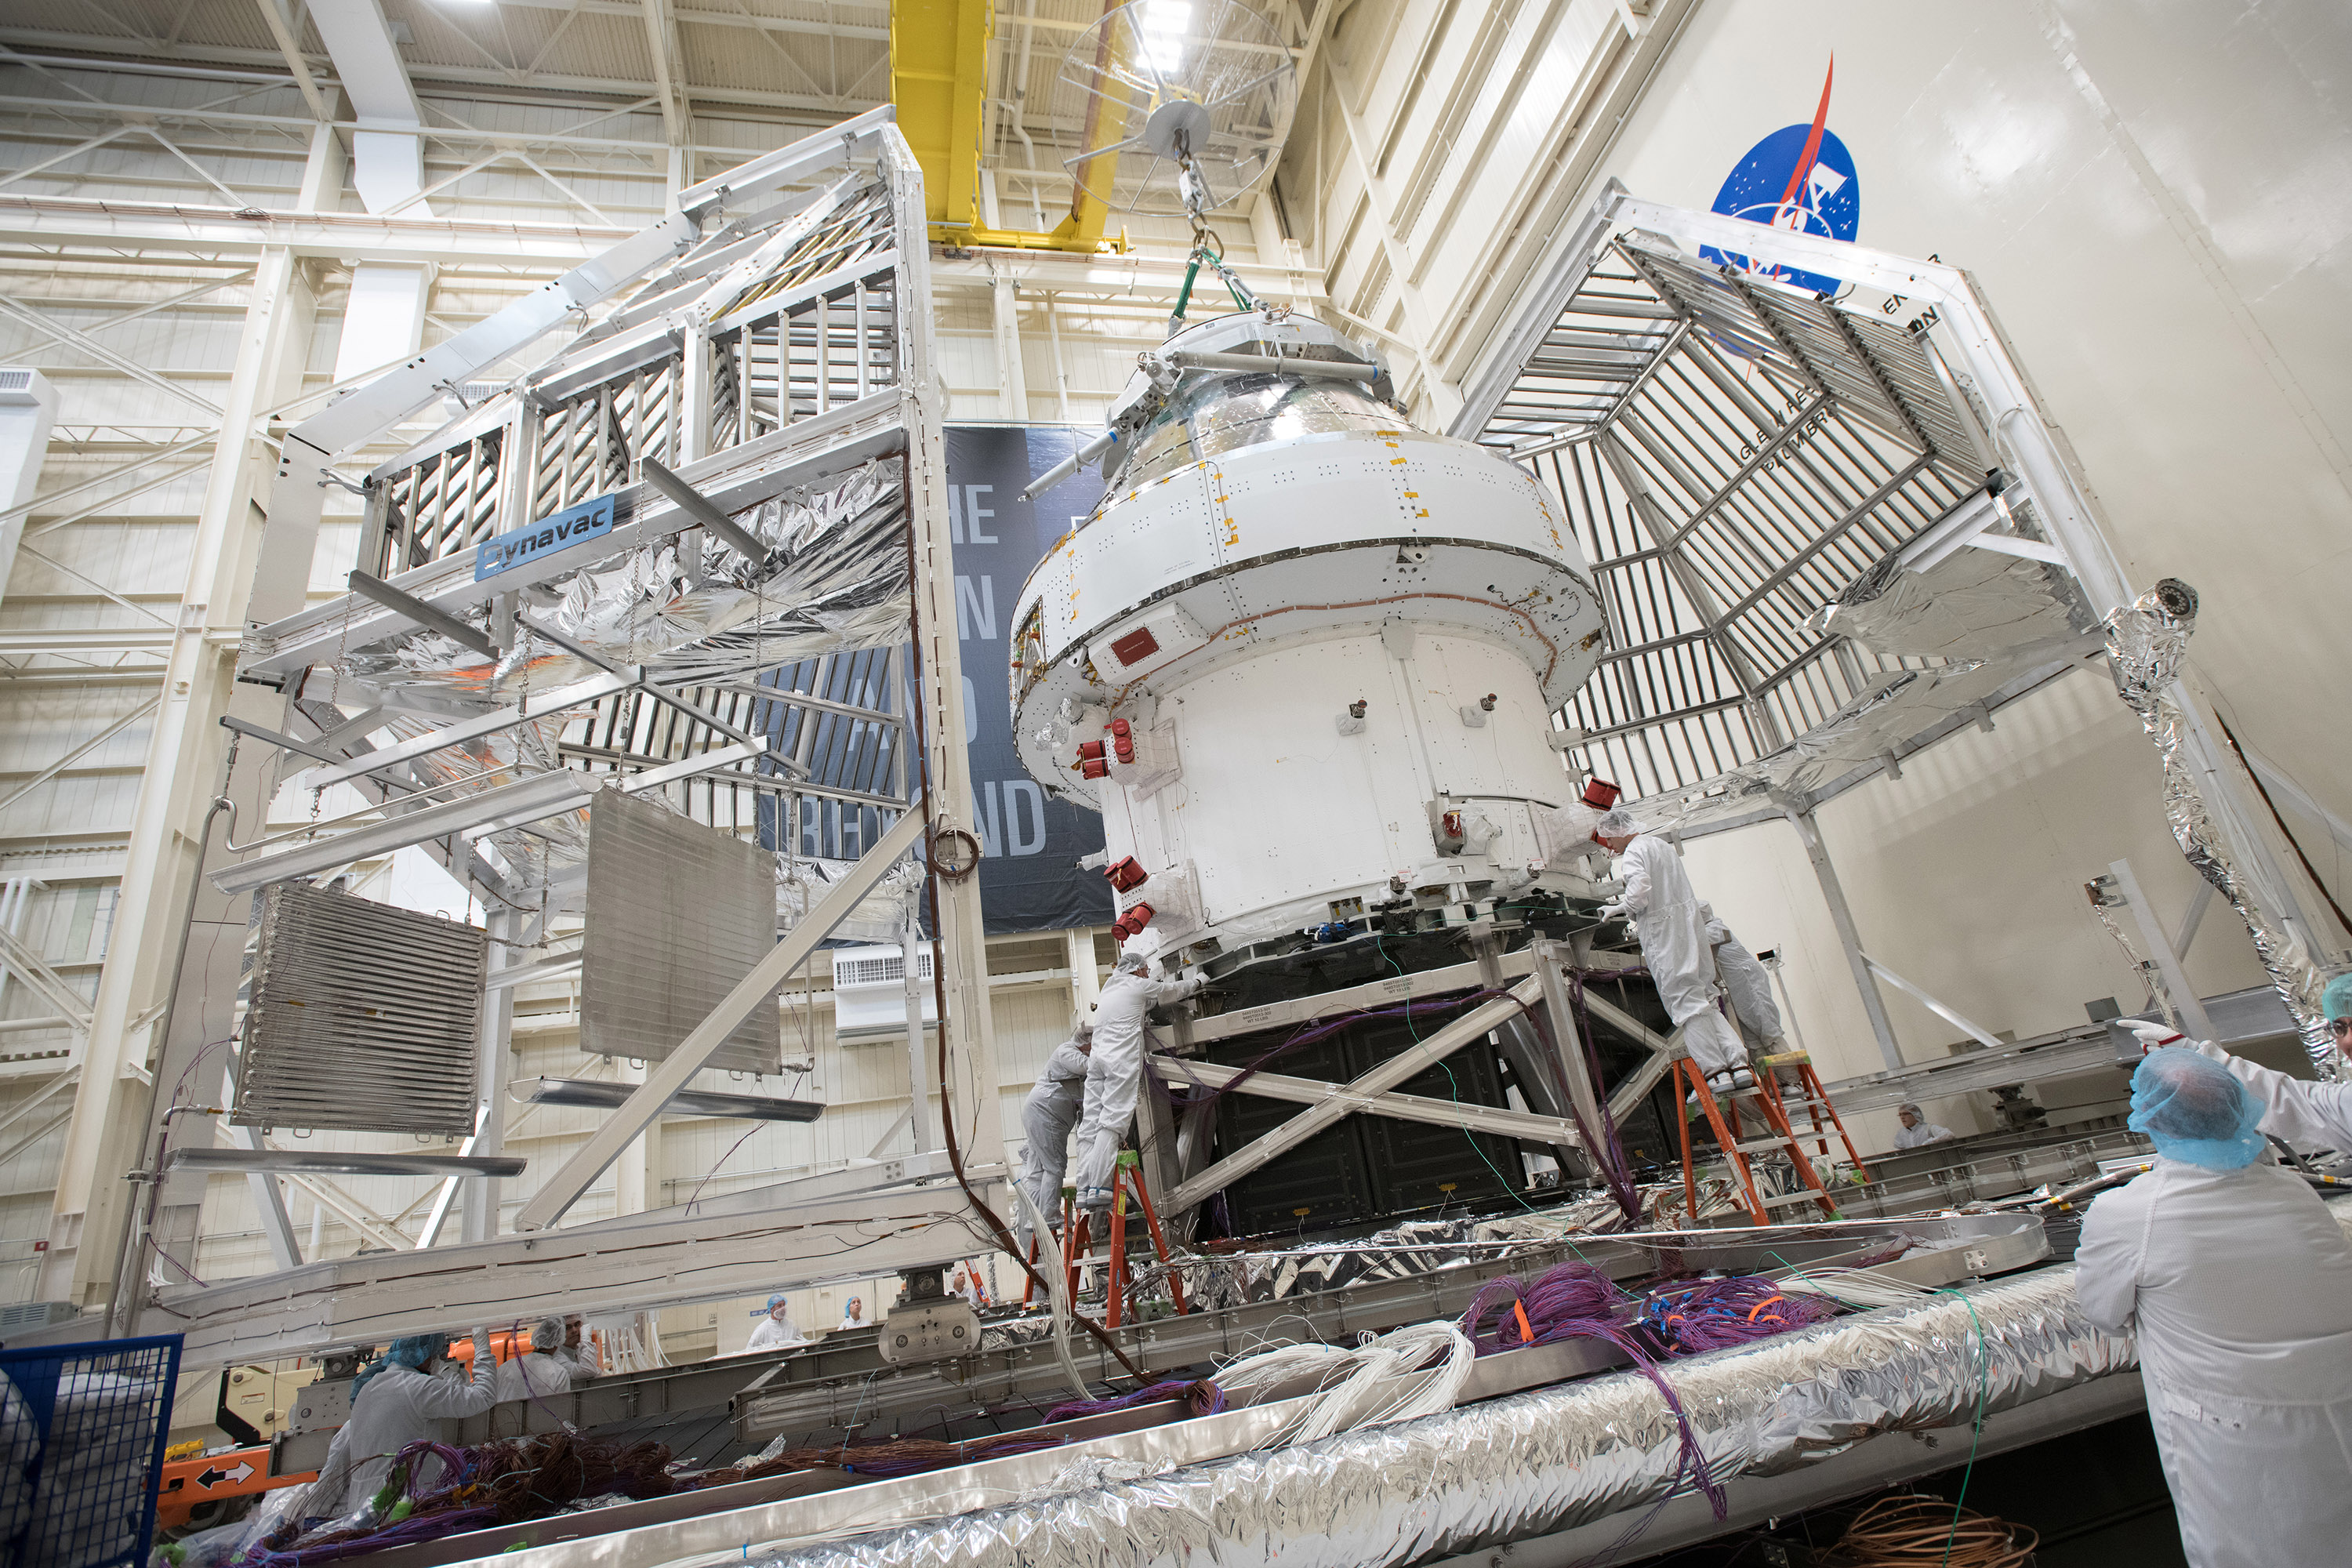 Orion spacecraft is being loaded into the heat flux system at the Space Environments Complex at NASA's Plum Brook Station.